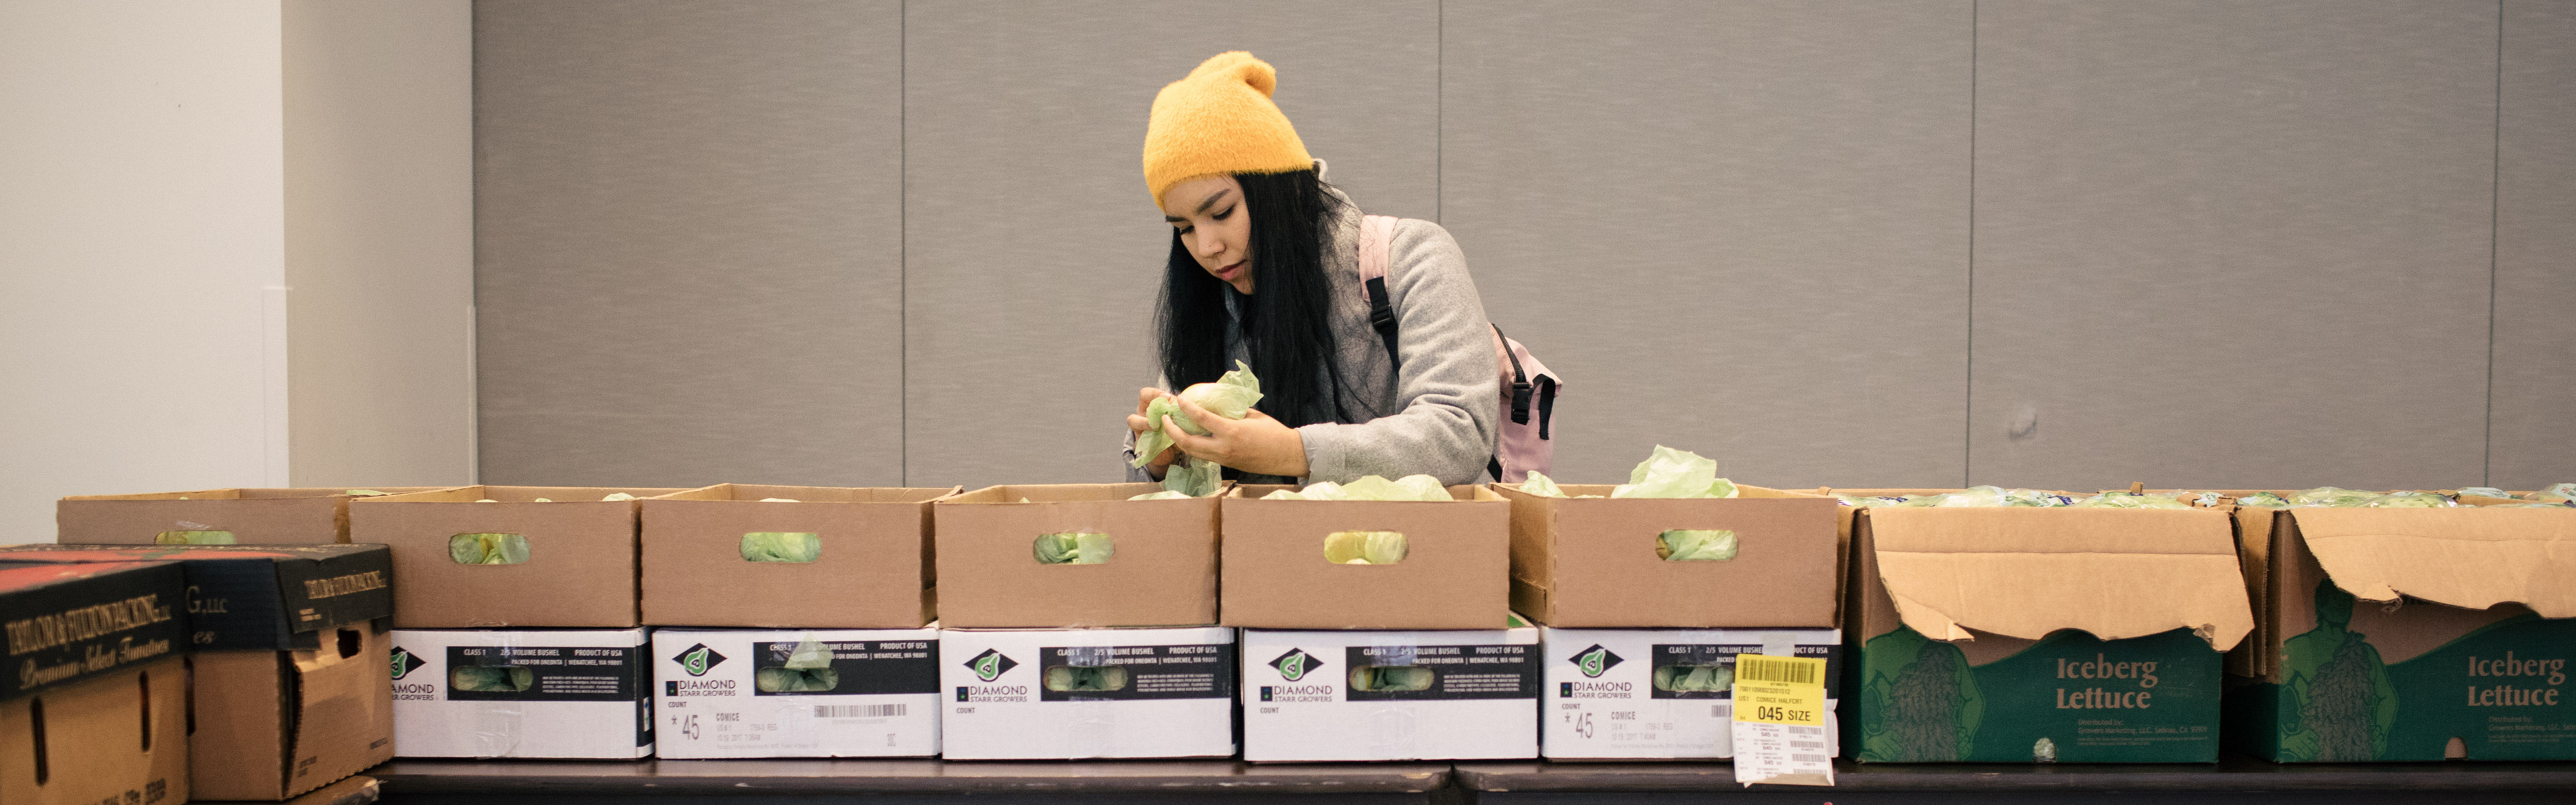 A person selects food from boxes at a Healthy Student Market